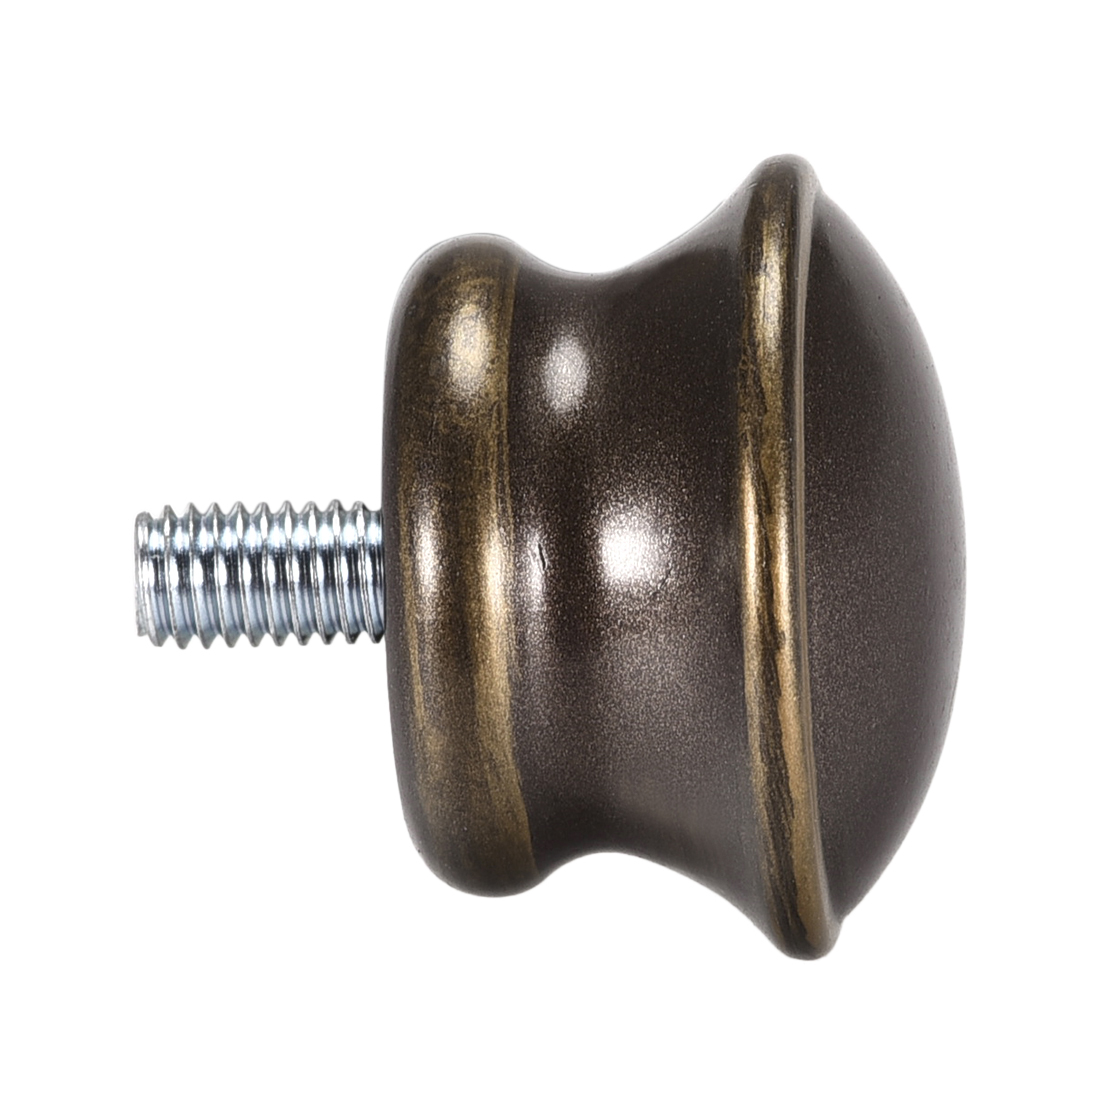 Uxcell Curtain Rod Finials Plastic M5 Thread Dia 1.1 inch x 1.06 inch Brown 4Pack - image 3 of 6